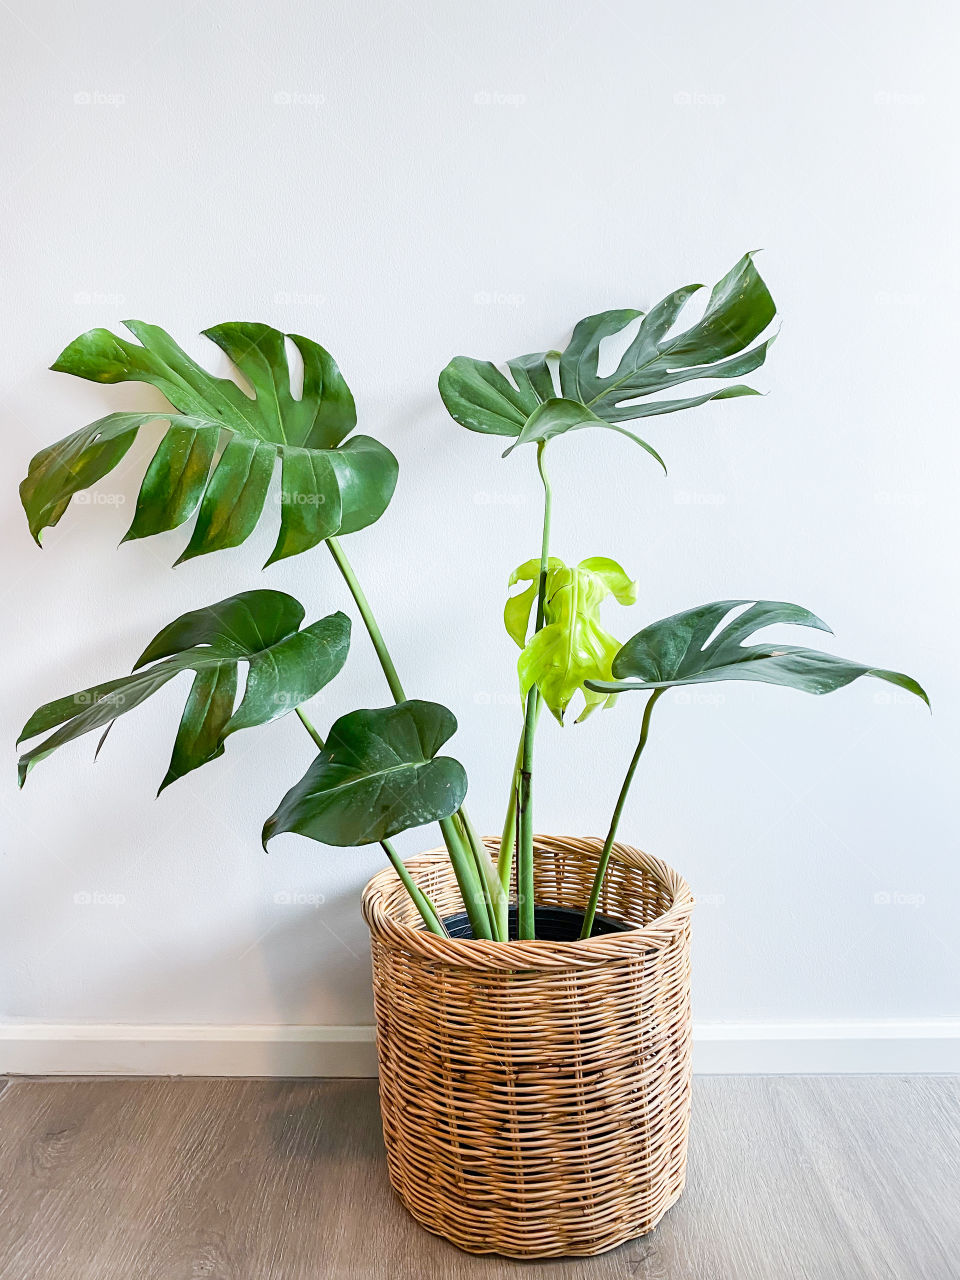 Monstera tree in a pot stands on a wooden floor 